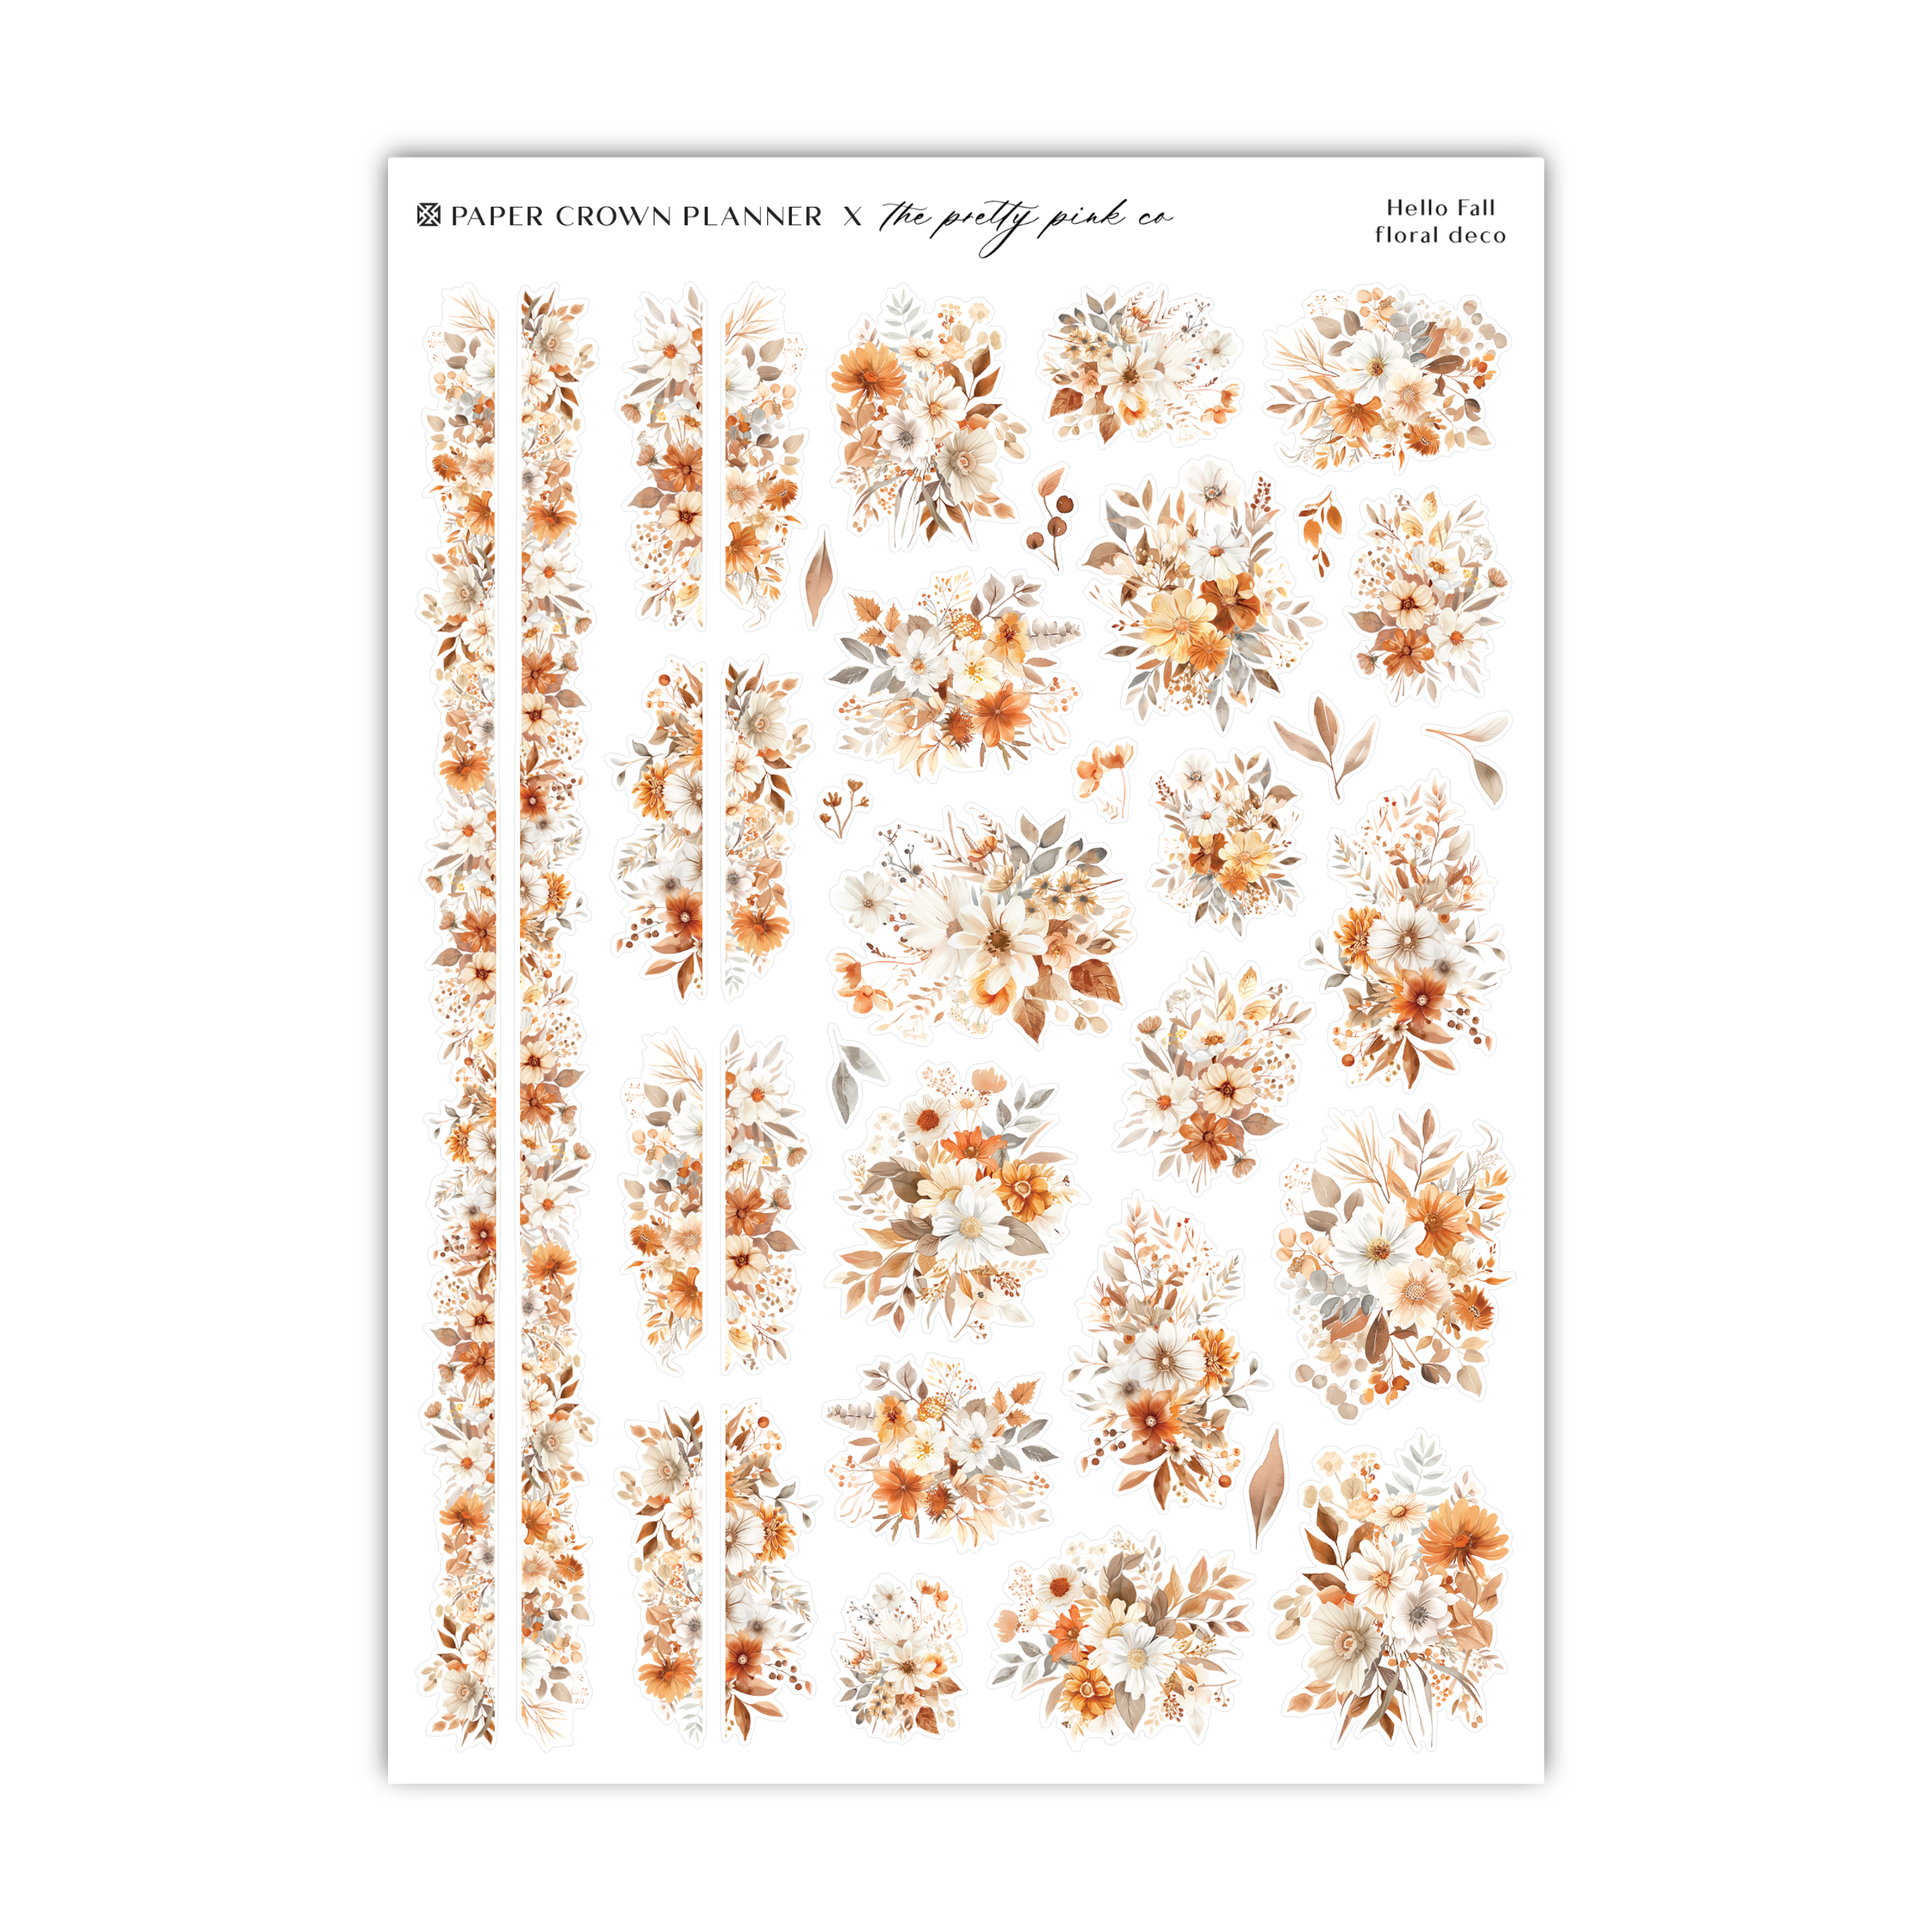 a sheet of watercolor flowers on a white background